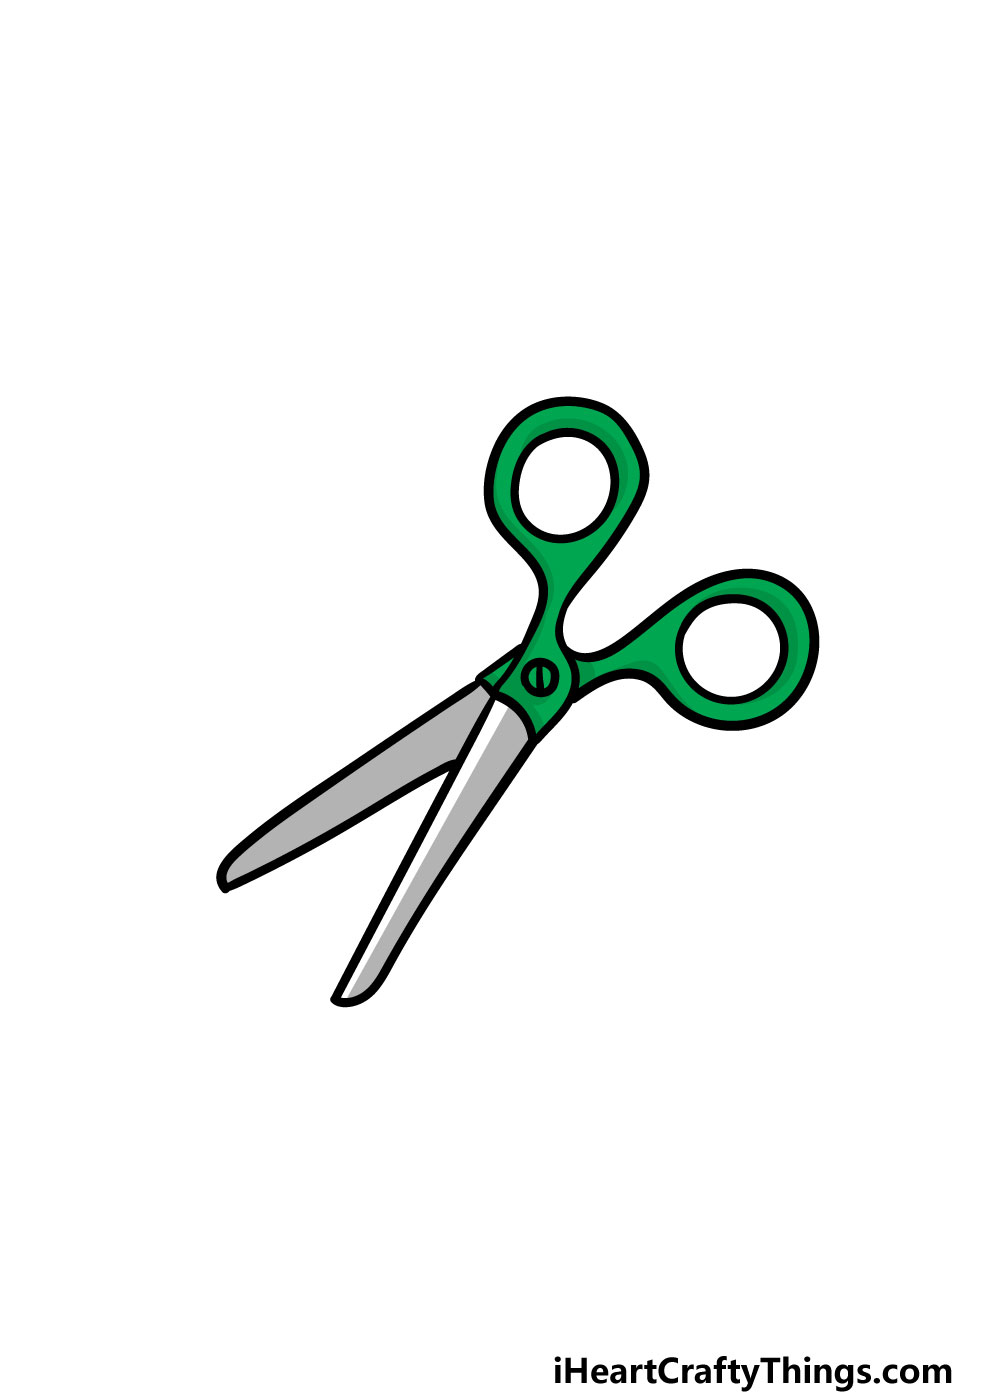 Detail Picture Of A Scissors Nomer 52